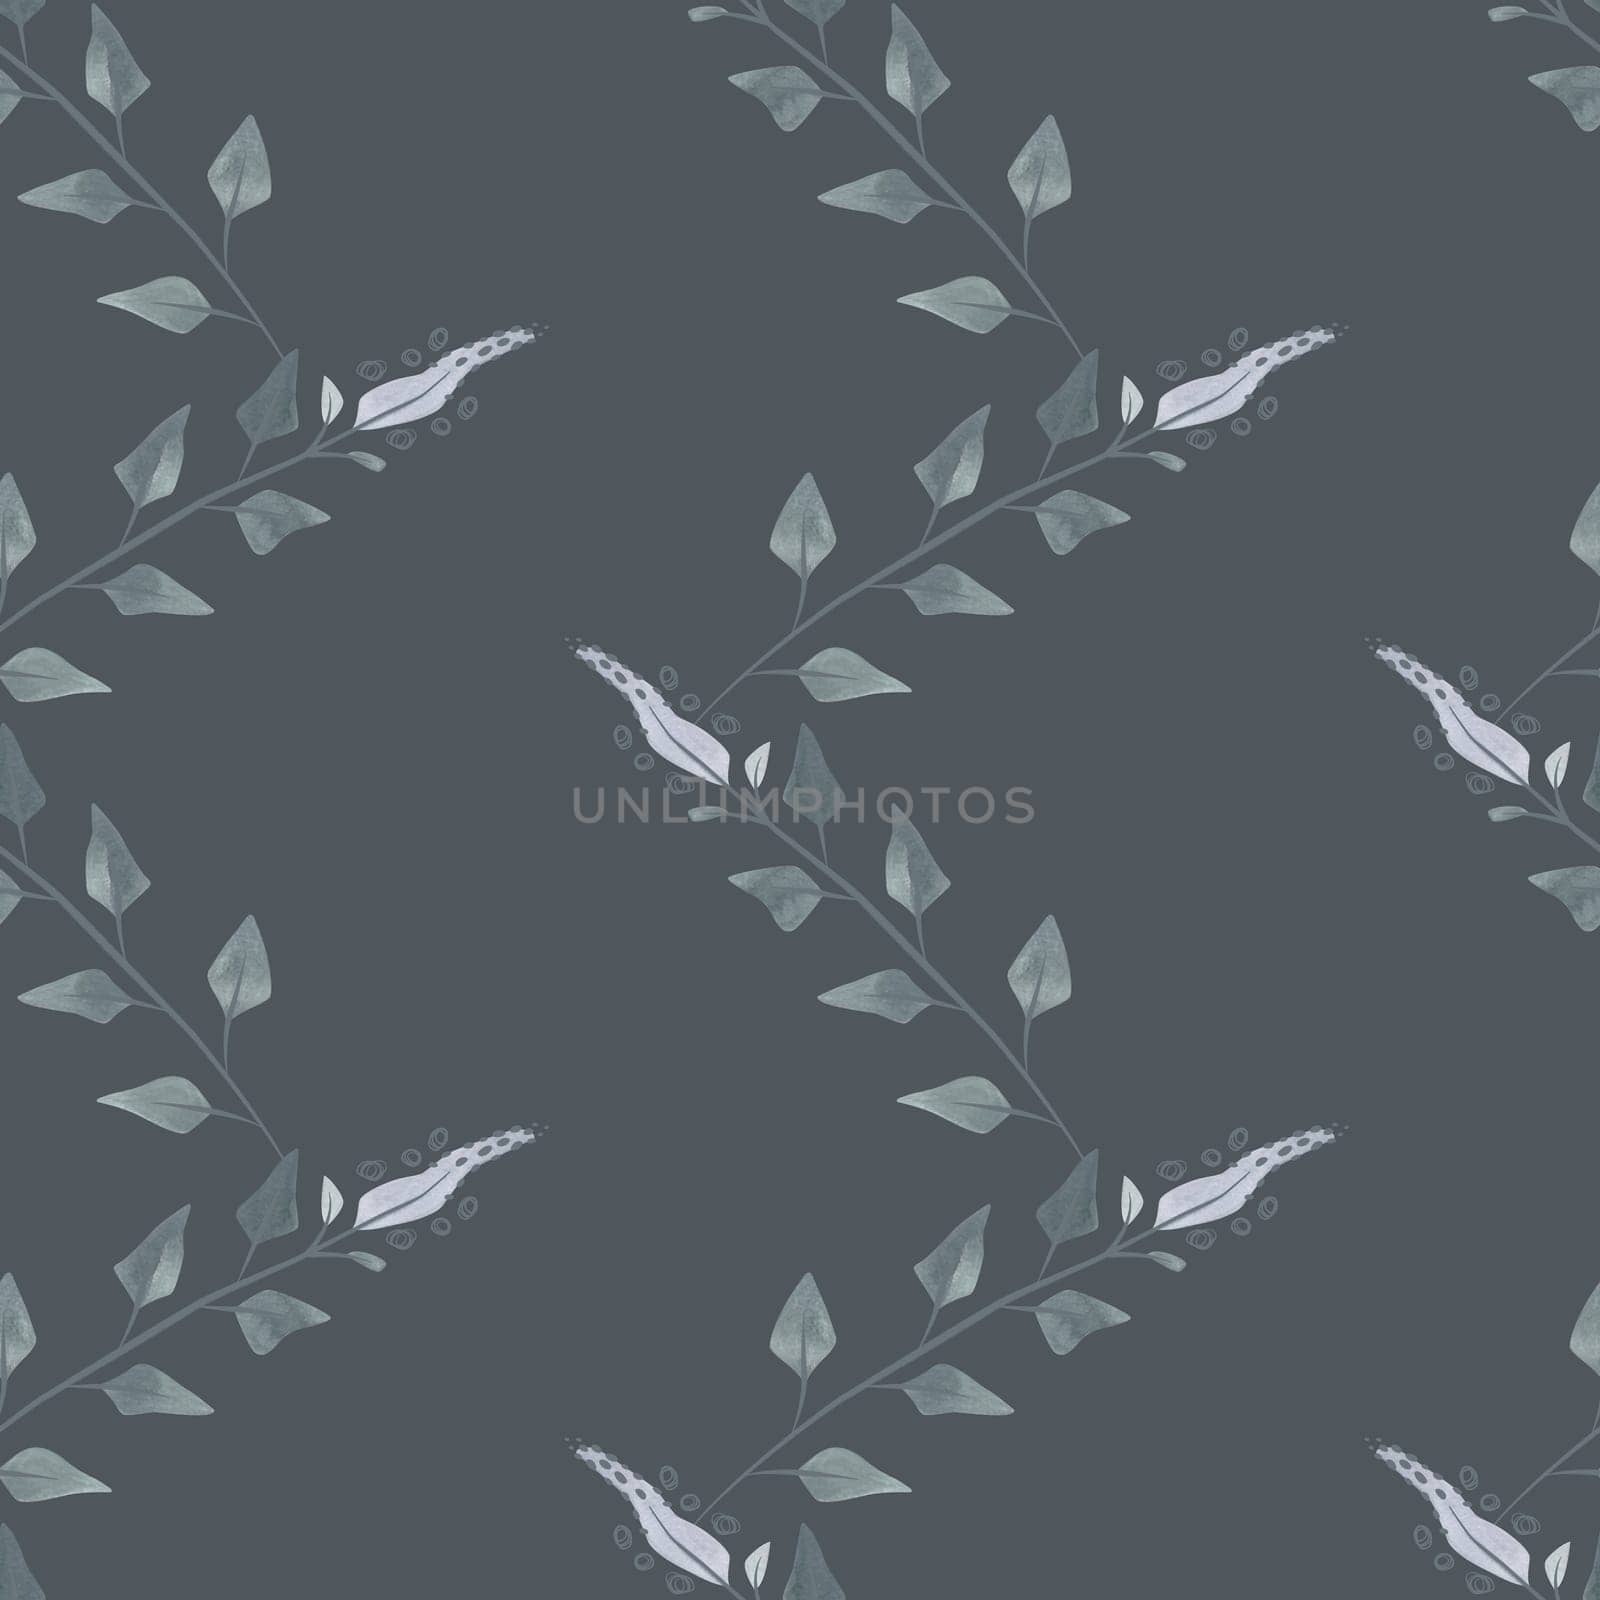 Flowering twigs and leaves of mint or lemon balm in a dusty green color in sketch style. Seamless watercolor pattern for fabric, wallpaper, wrapping paper, packaging cosmetics, tablecloths, curtains and home textiles